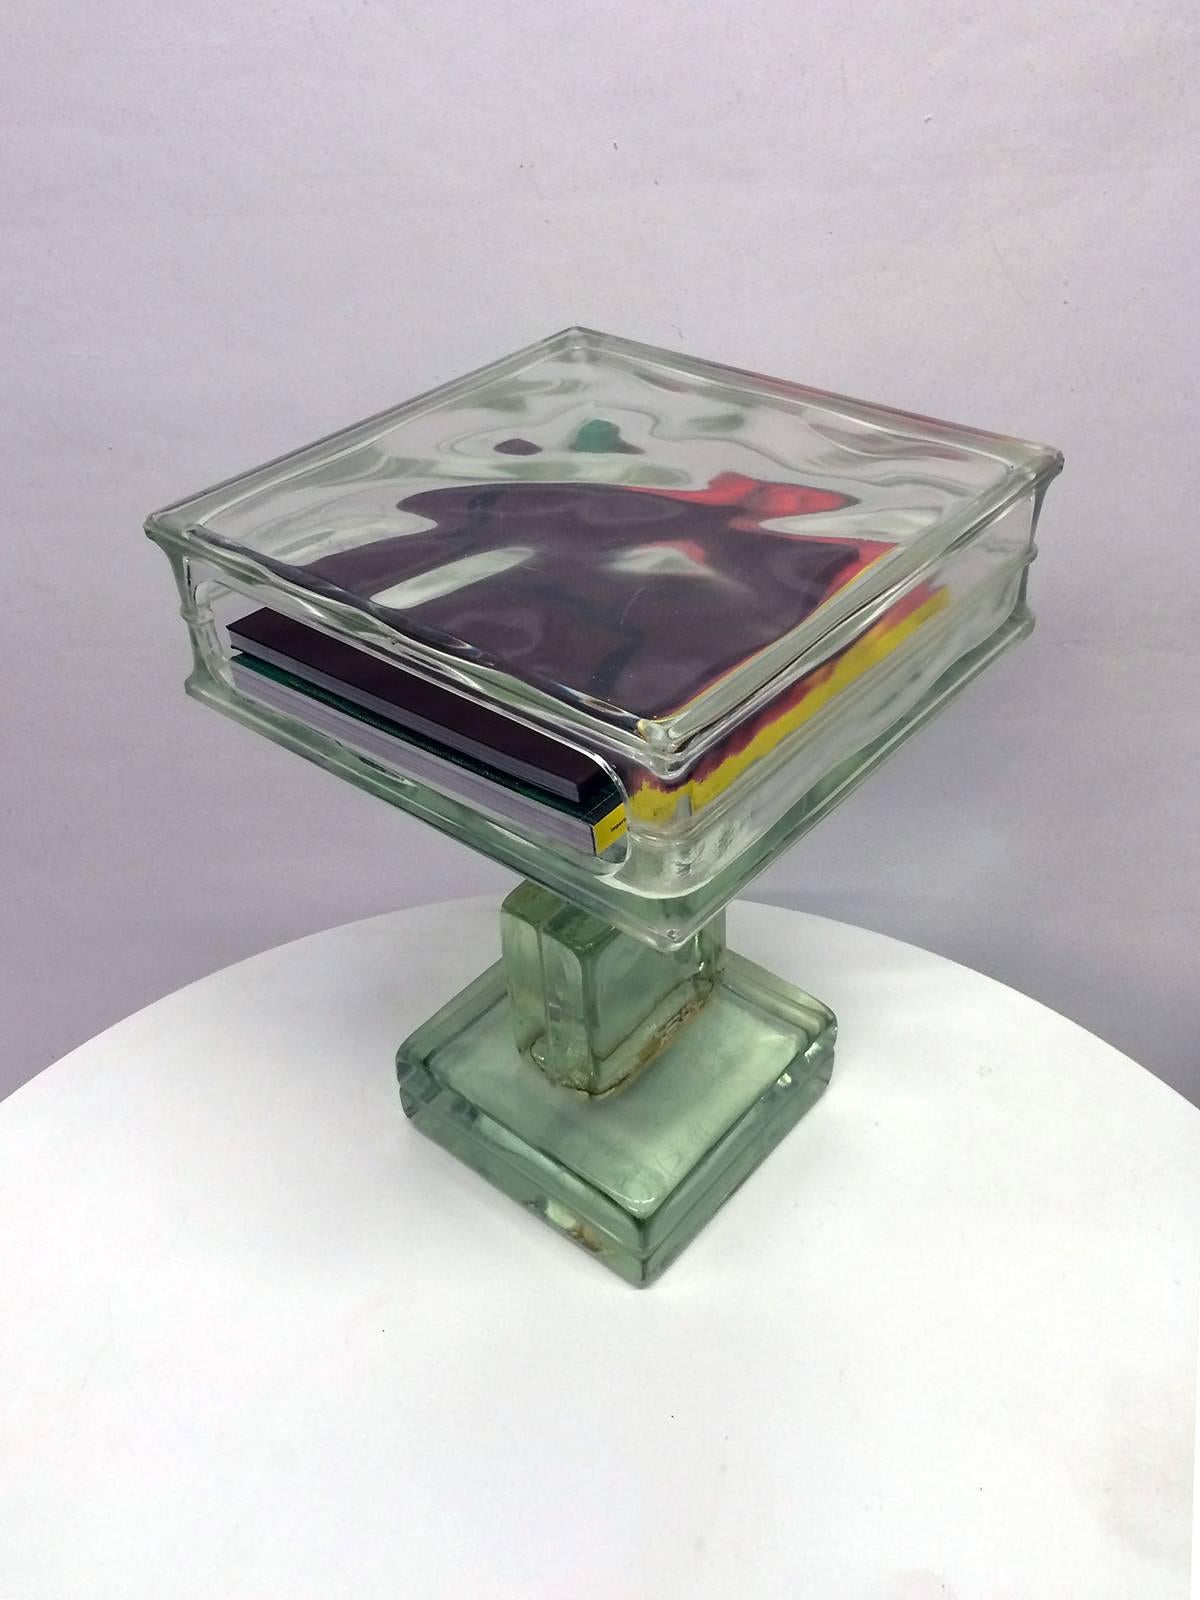 Side table constructed from four glass blocks. The cube that forms the table top has one open side allowing for the storage of magazines or books. This is a very unique piece.